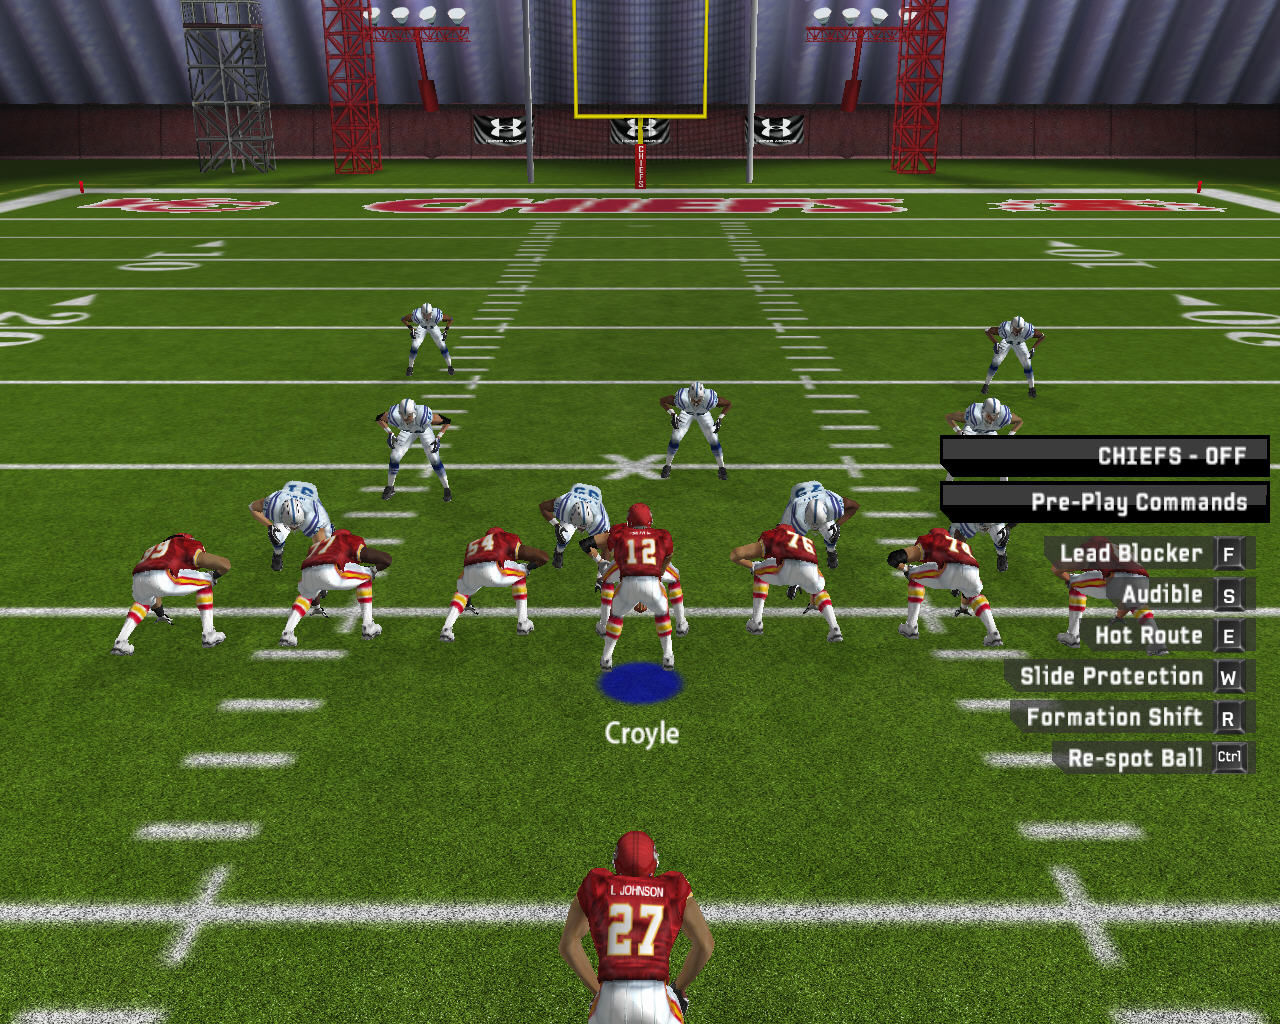 how to use ps3 controller on madden 08 pc